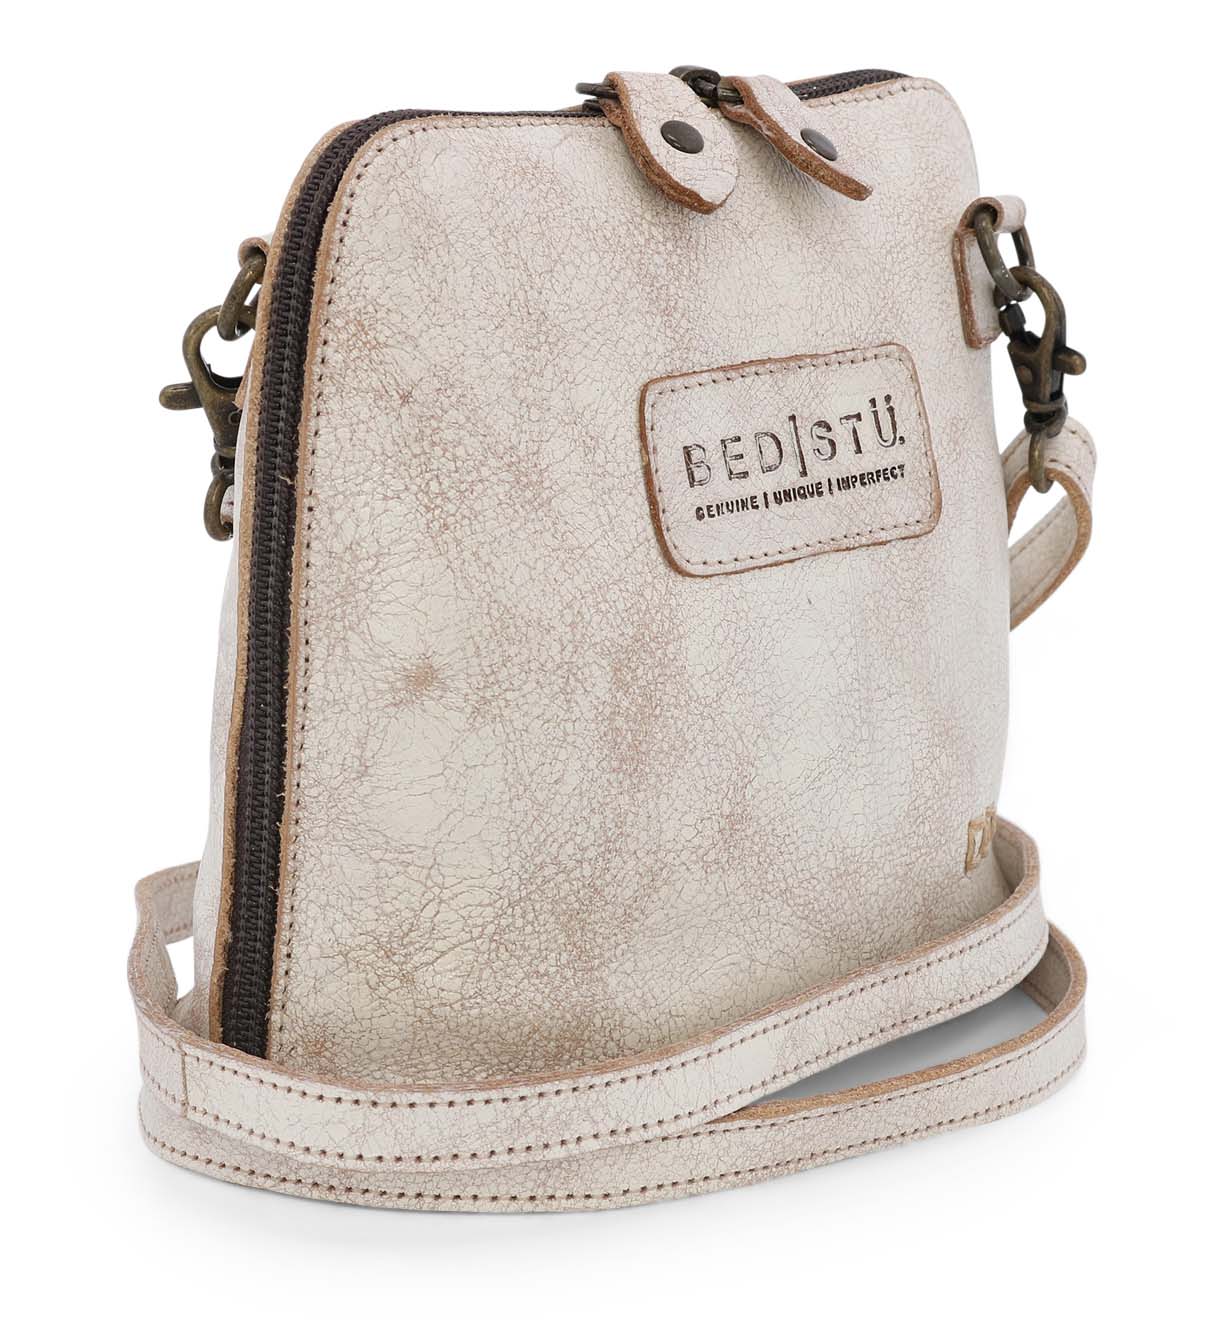 A white leather cross body bag with the word Ventura by Bed Stu on it.